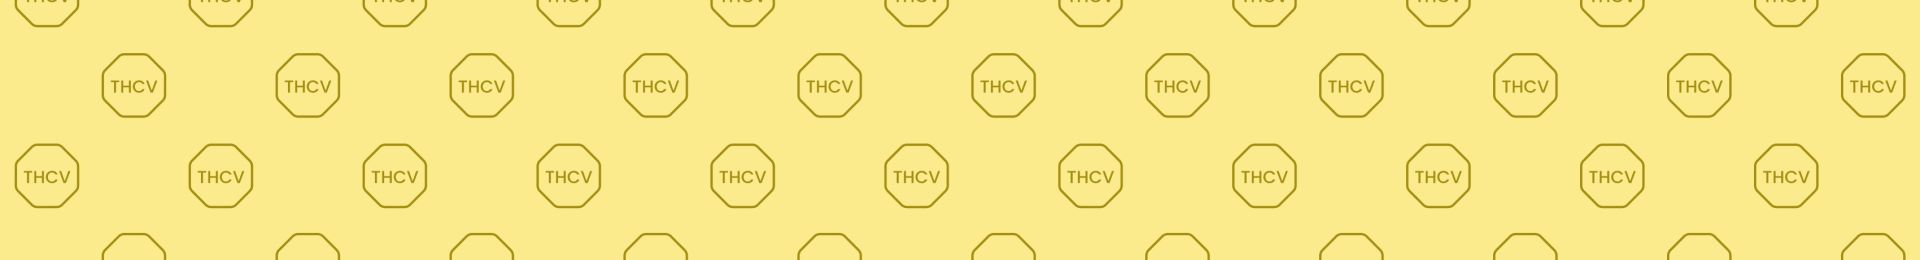 THCV Products